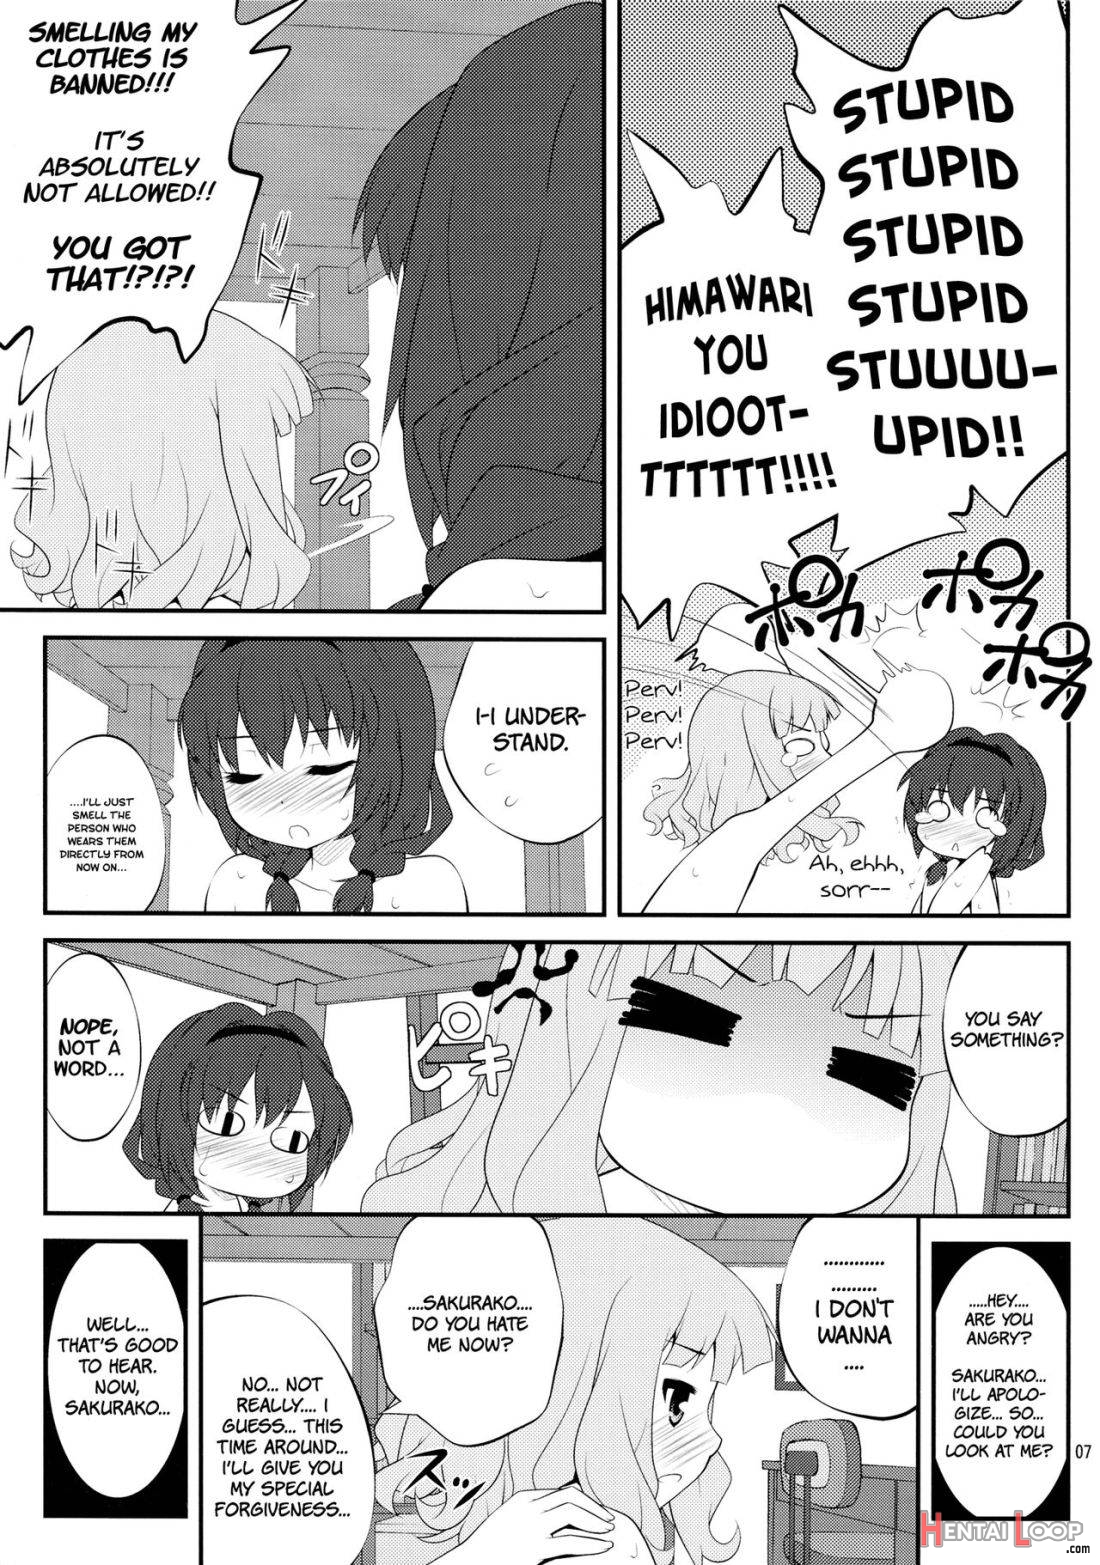 Himegoto Flowers 3 page 6